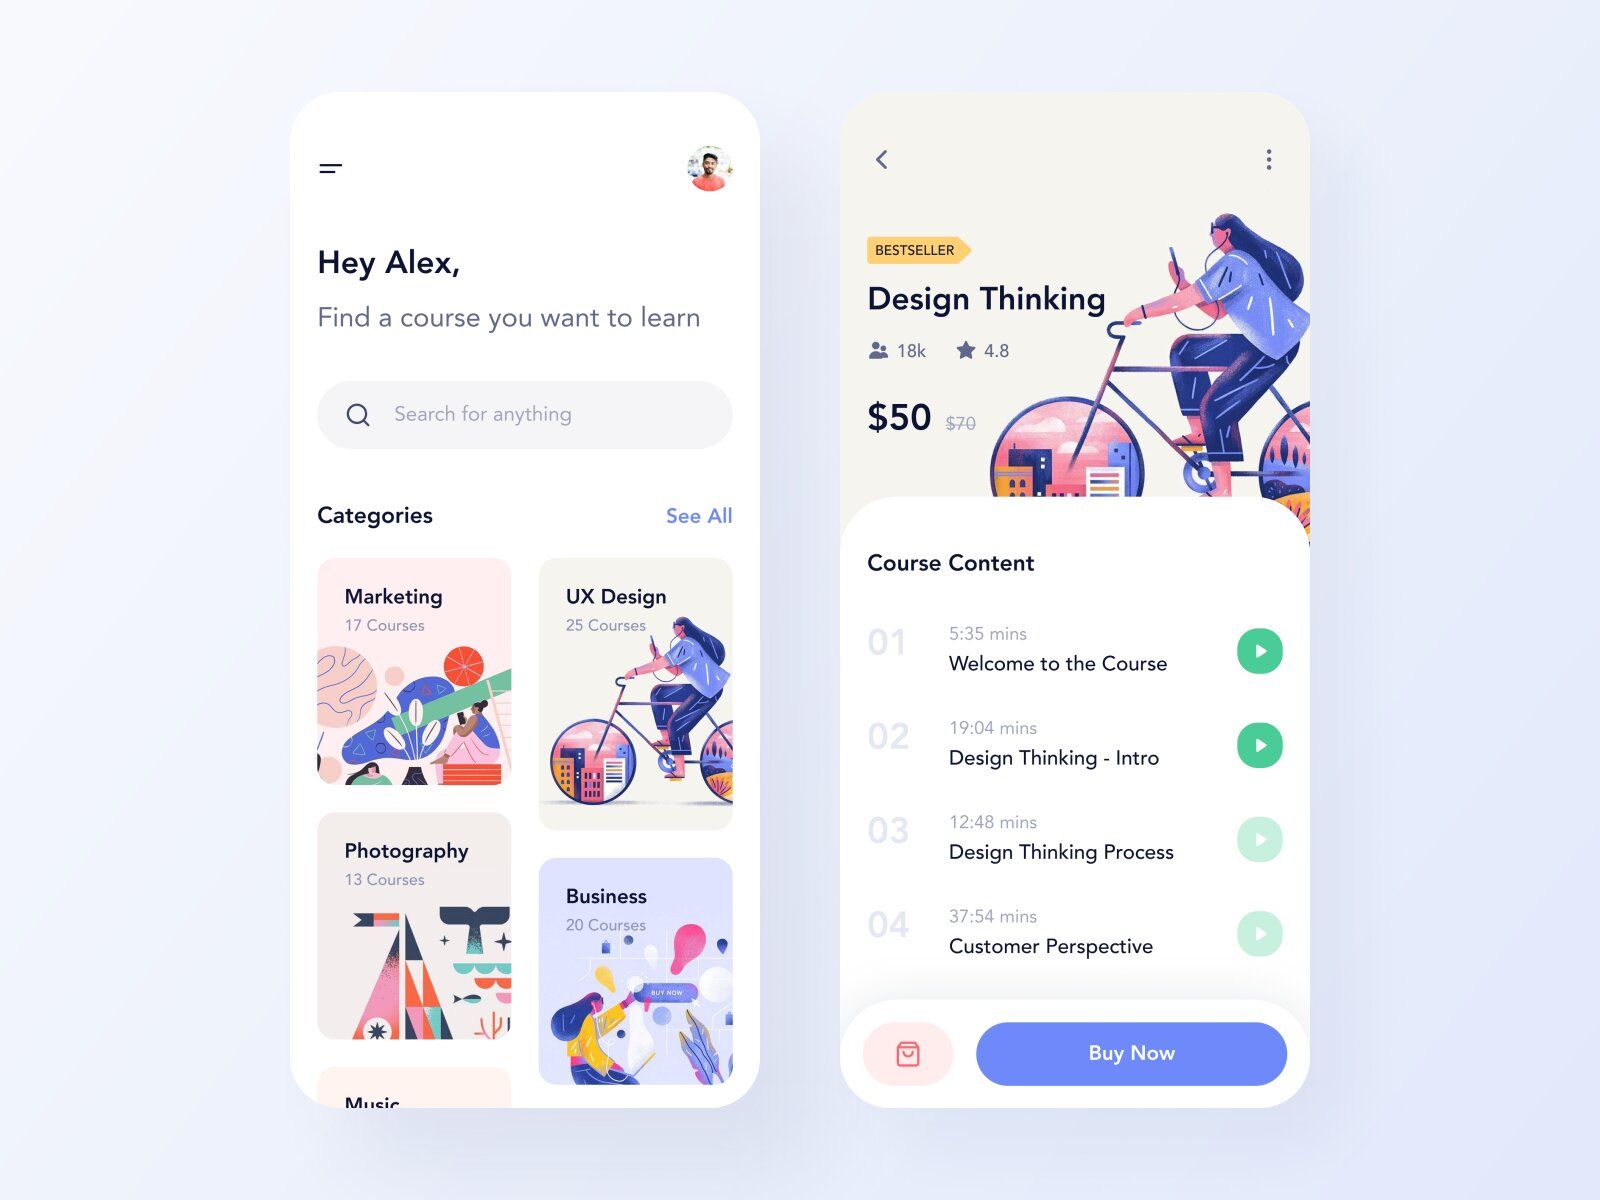 To make the website convenient for users of a mobile, website should adjust to screen sizes (*image by [simantOo](https://dribbble.com/simantoo){ rel="nofollow" target="_blank" .default-md}*)